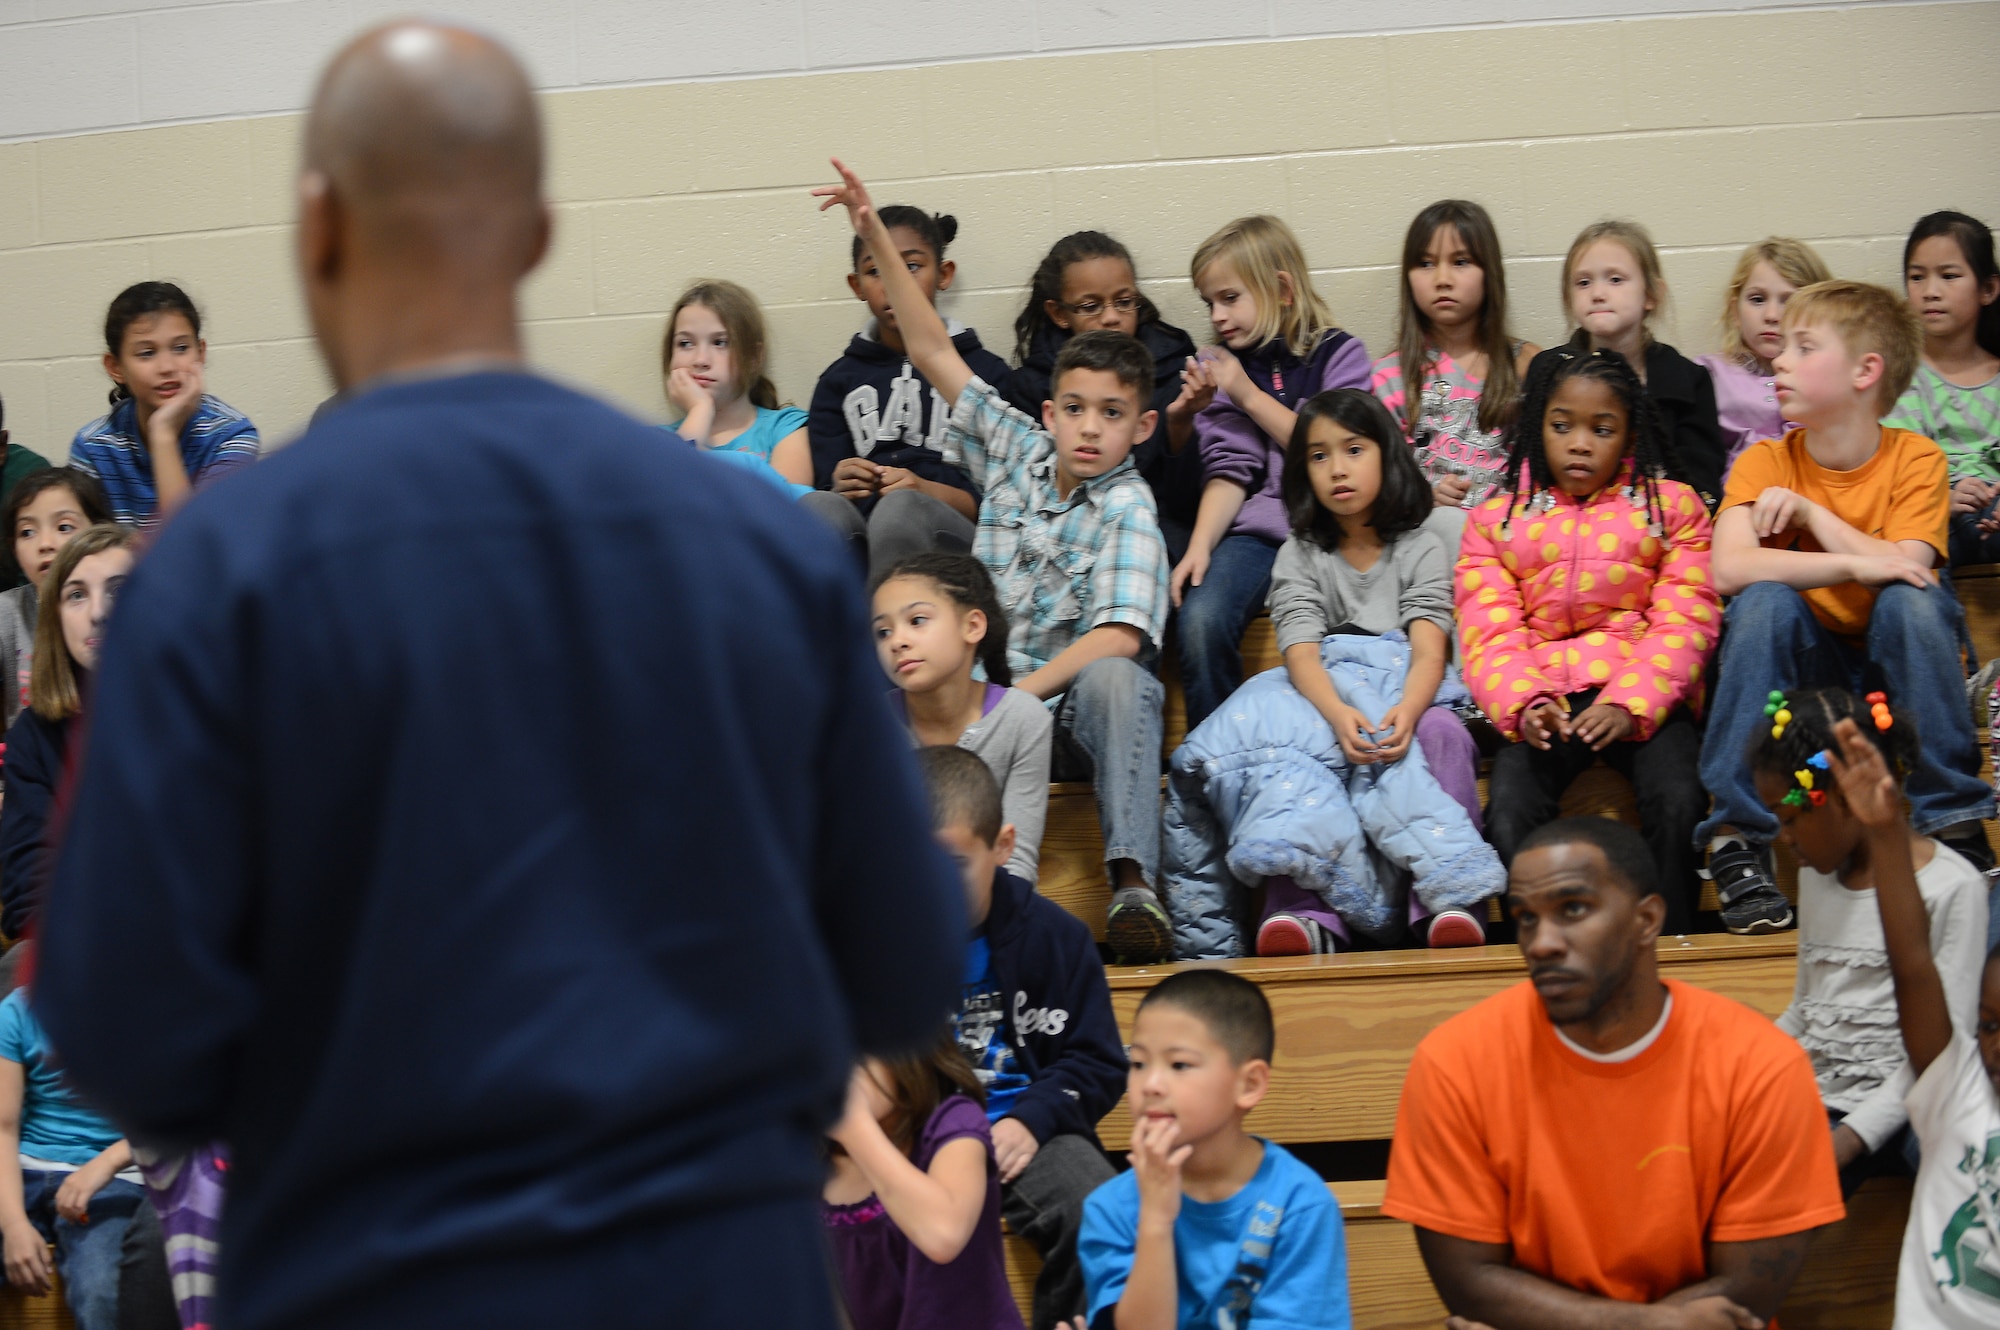 Kids listen to Derrick Stafford, National Basketball Association referee, speak at the Shaw Air Force Base youth center, S.C., Dec. 14, 2012.  Stafford is in his 25th NBA season and has served twice on the executive board of the NBA Referee Association.  (U.S. Air Force photo by Airman 1st Class Nicole Sikorski/Released)